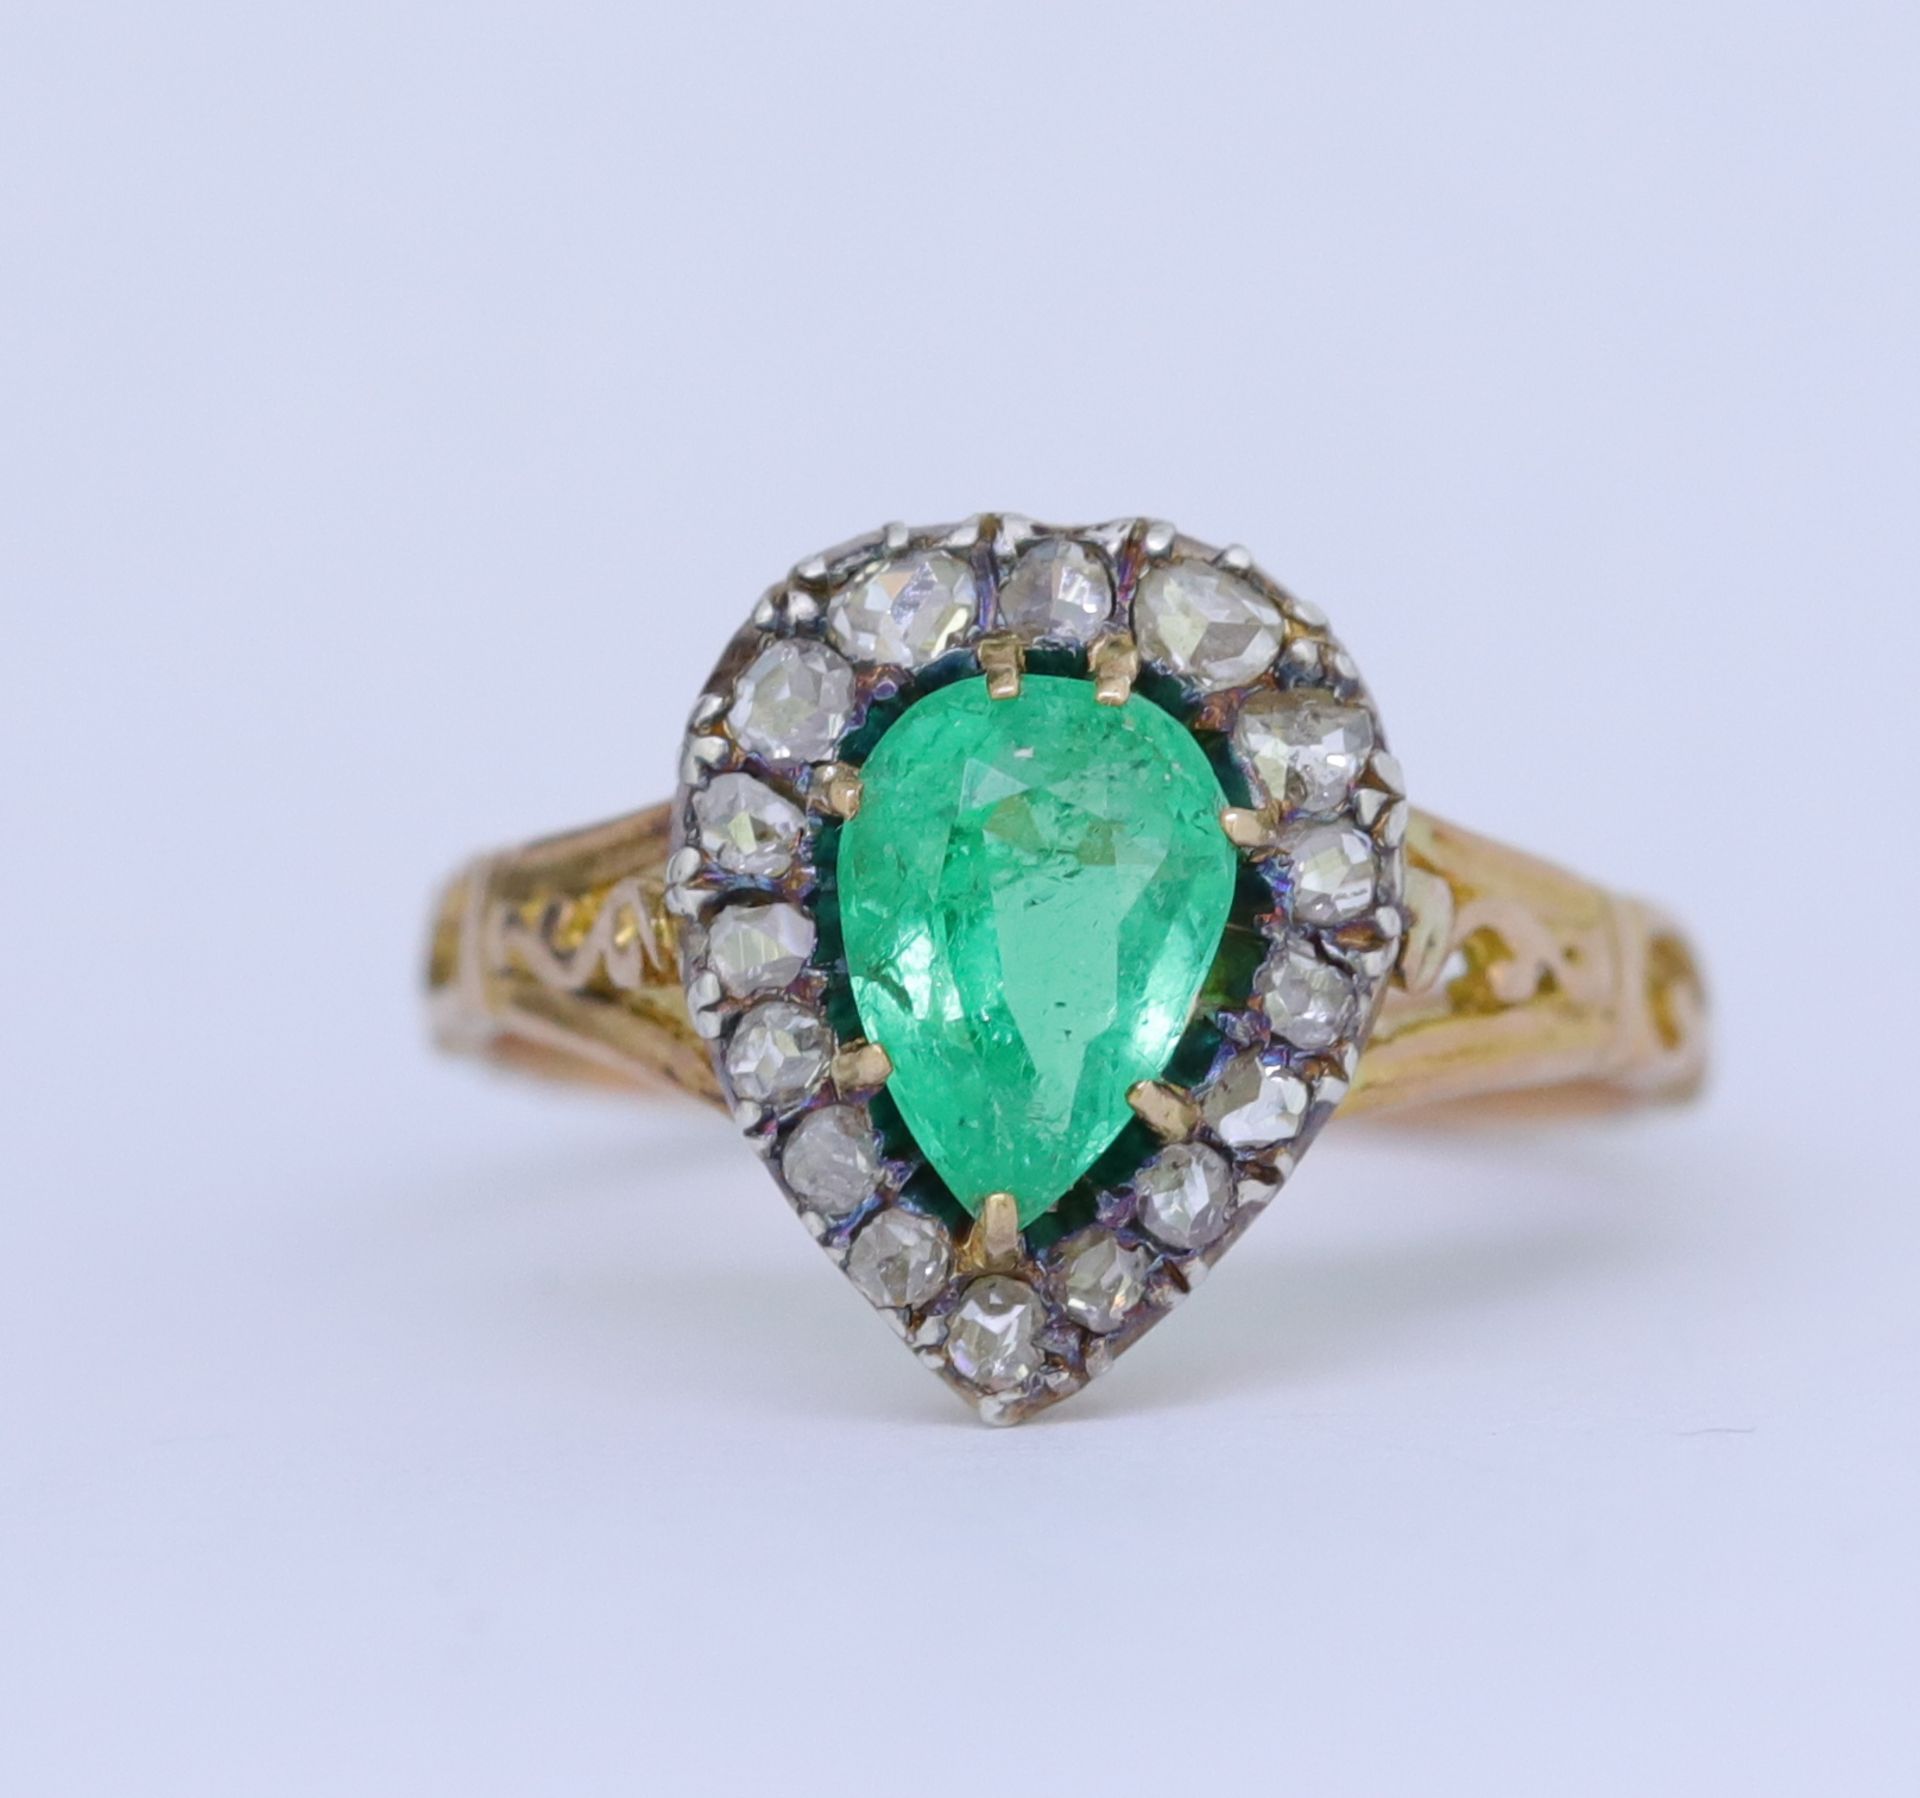 ANTIQUE EMERALD AND DIAMOND CLUSTER RING